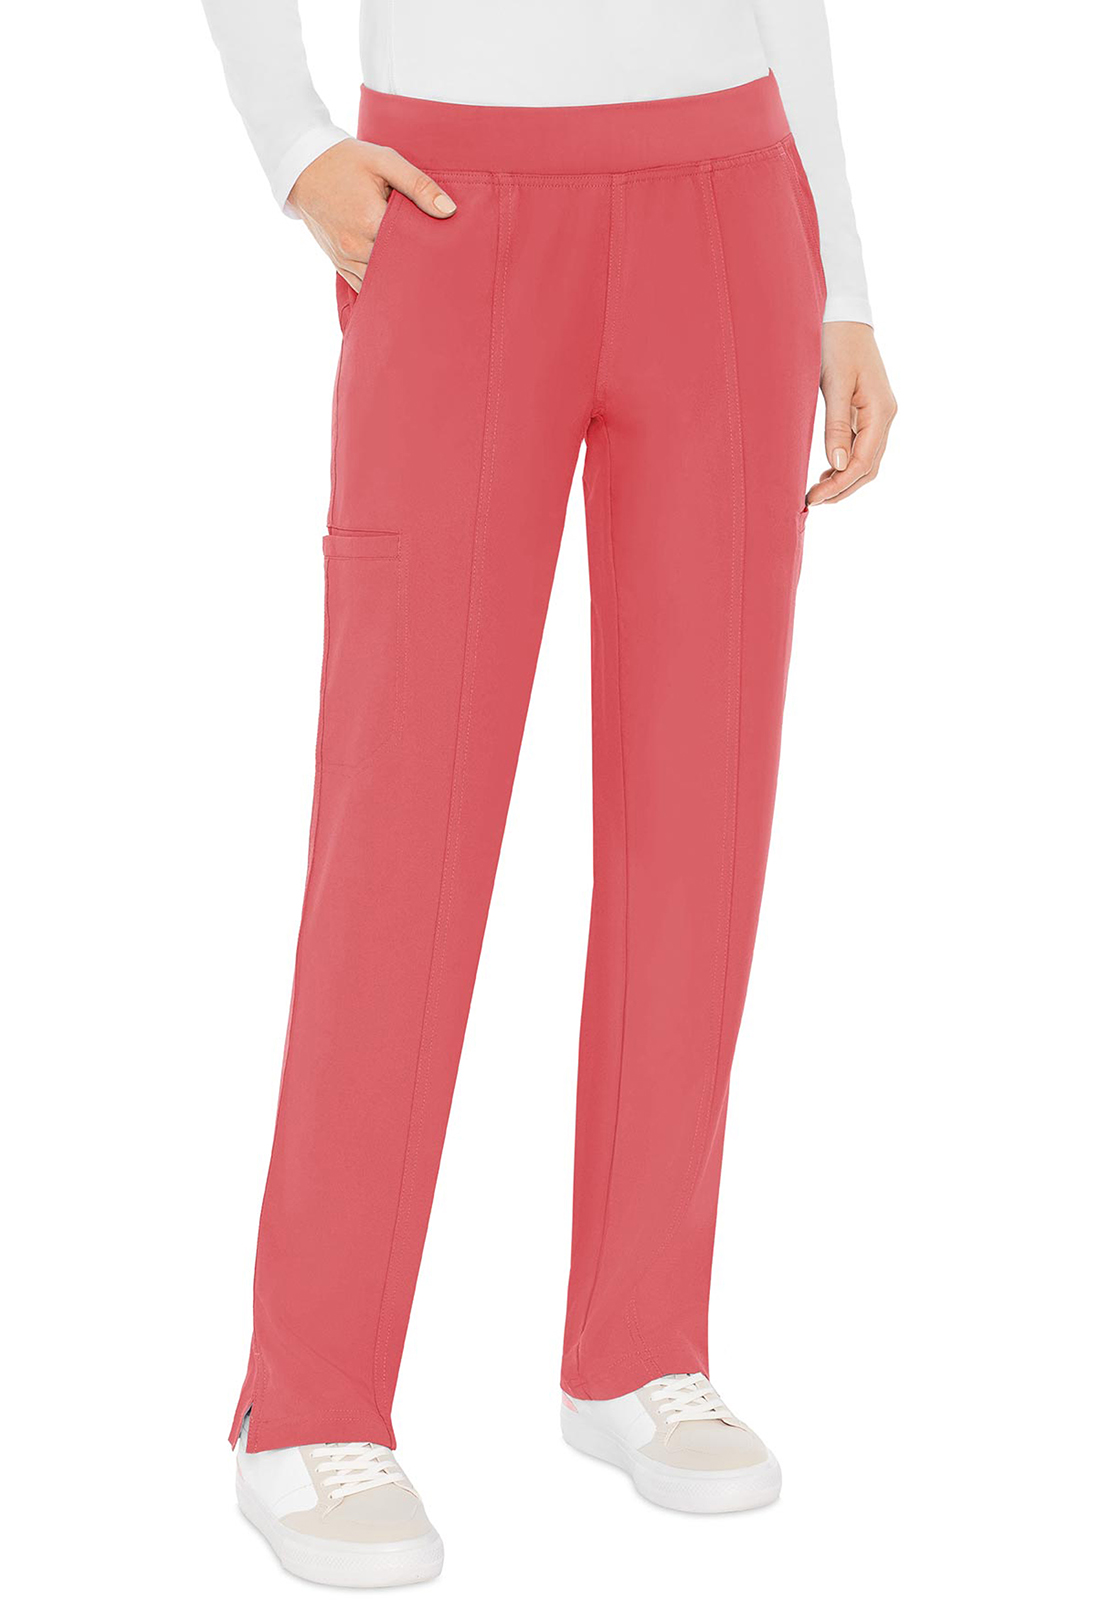 Yoga 2 Cargo Pocket Pant-Med Couture